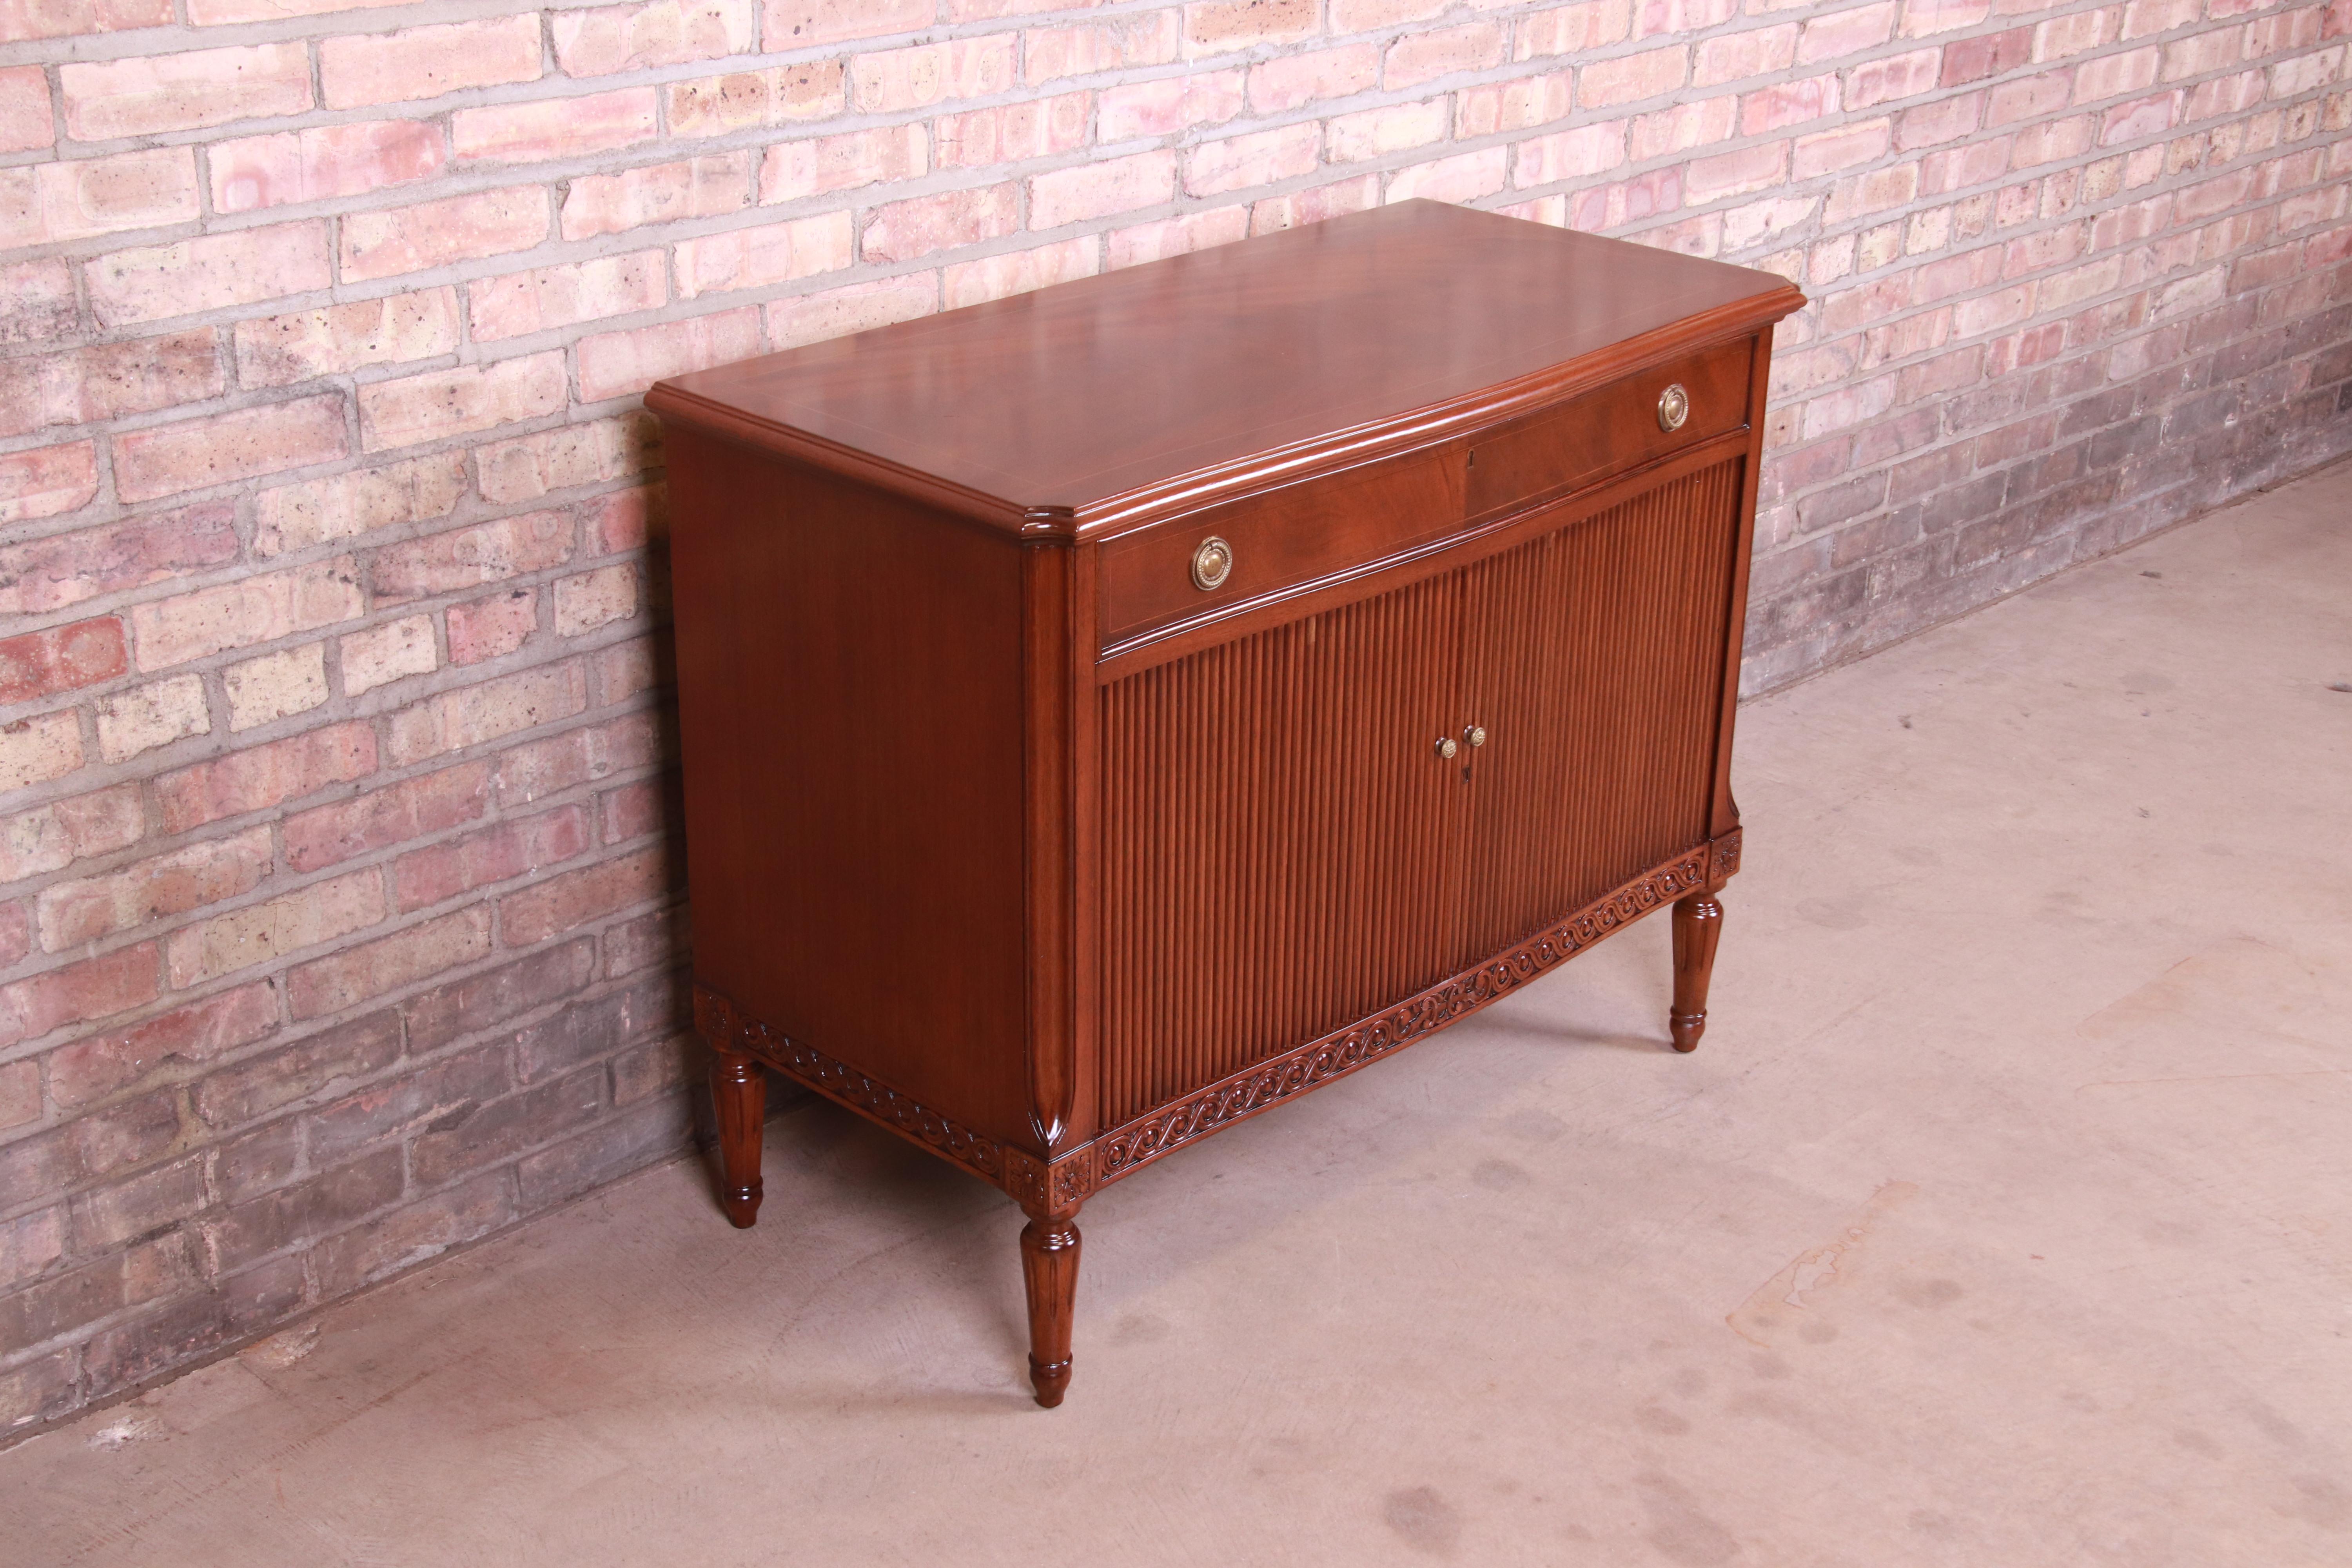 Brass Italian Regency Style Mahogany Tambour Door Server or Commode, Newly Refinished